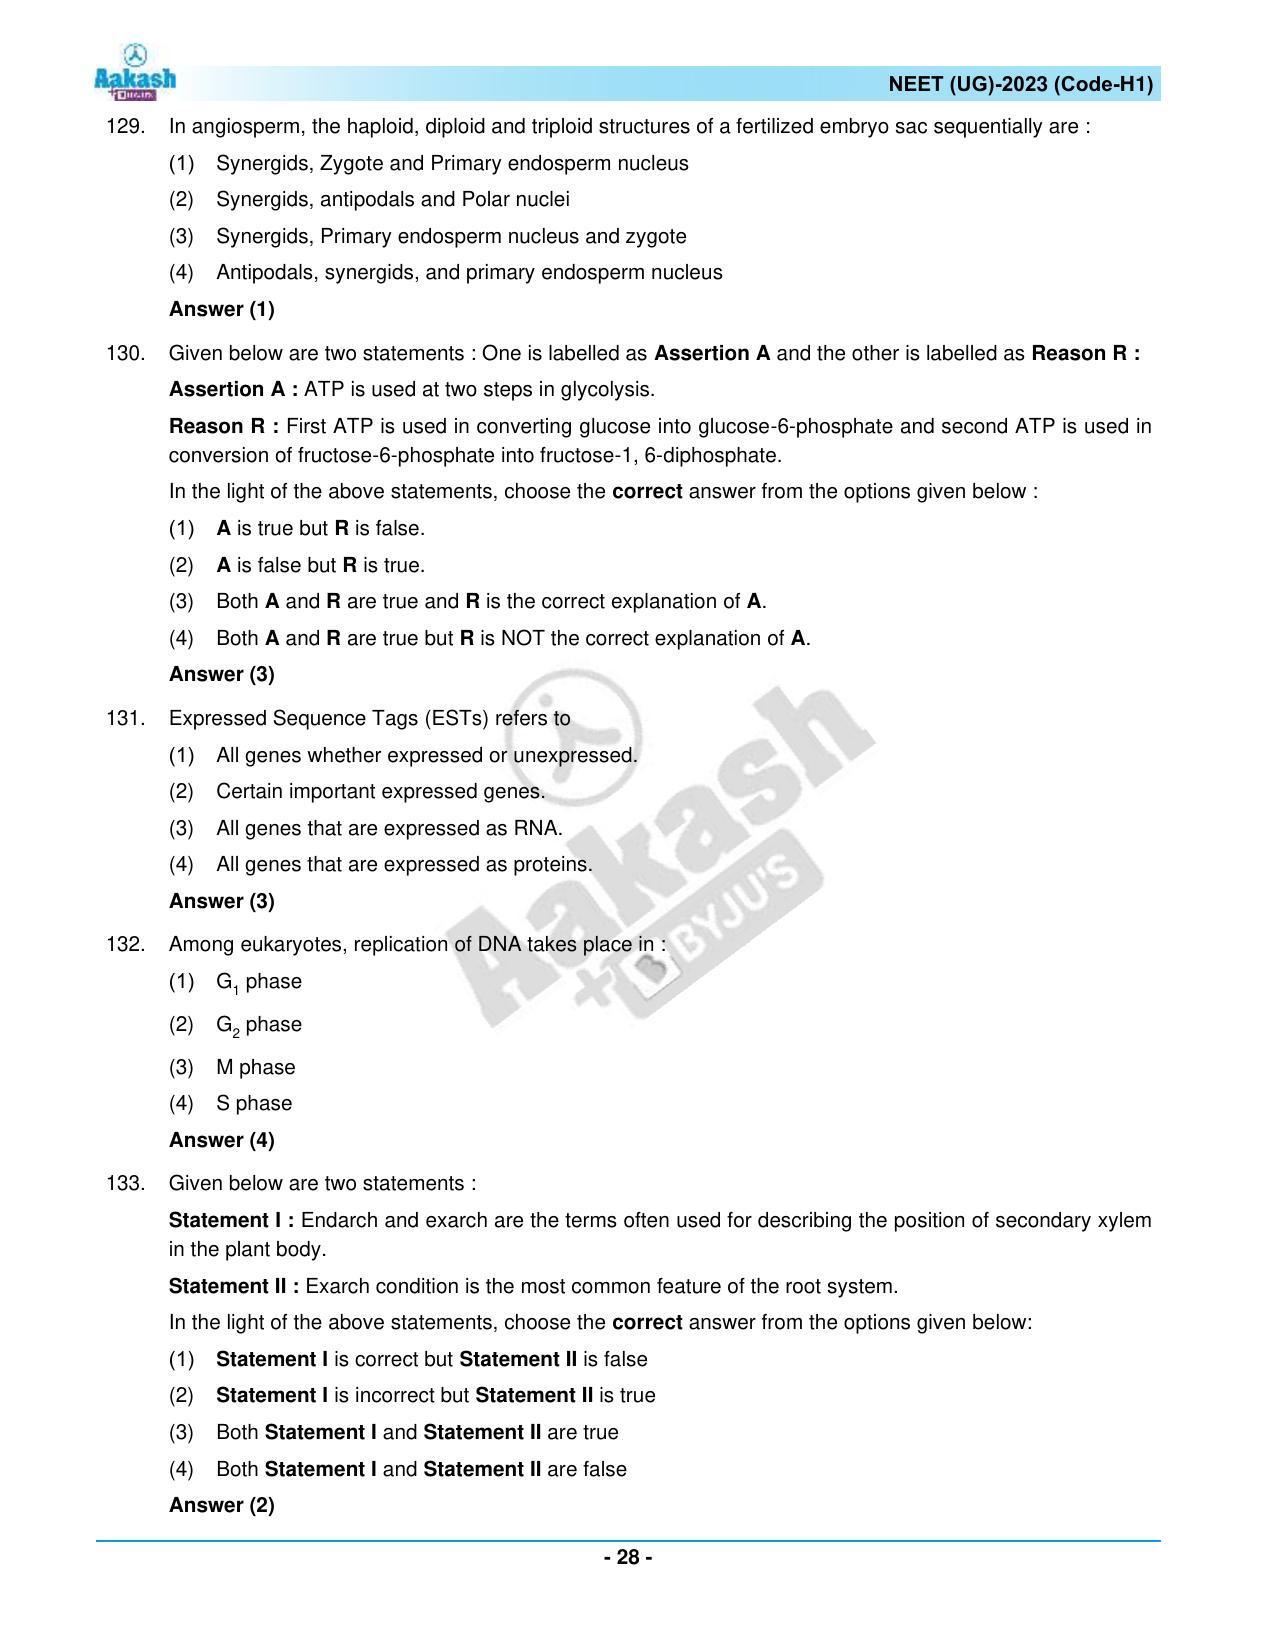 NEET 2023 Question Paper H1 - Page 28